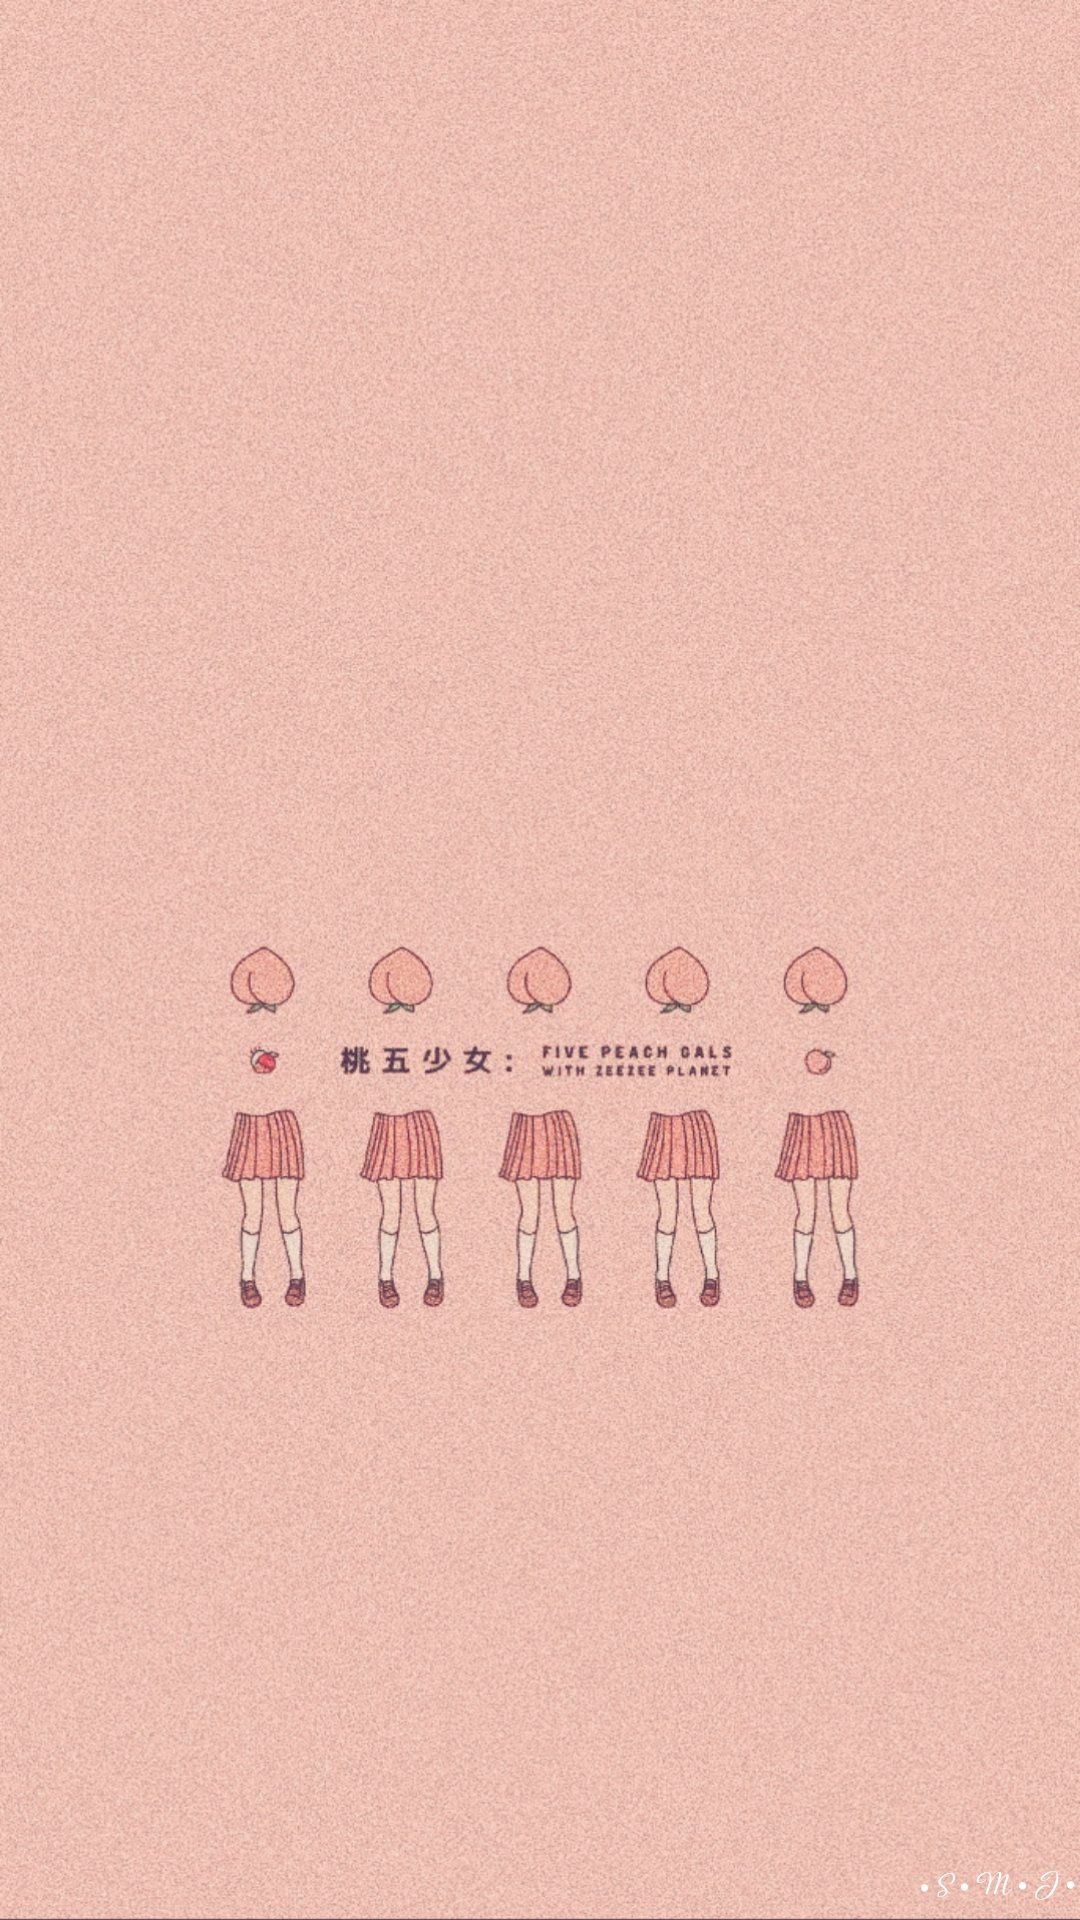 A pink background with four girls in skirts - Peach